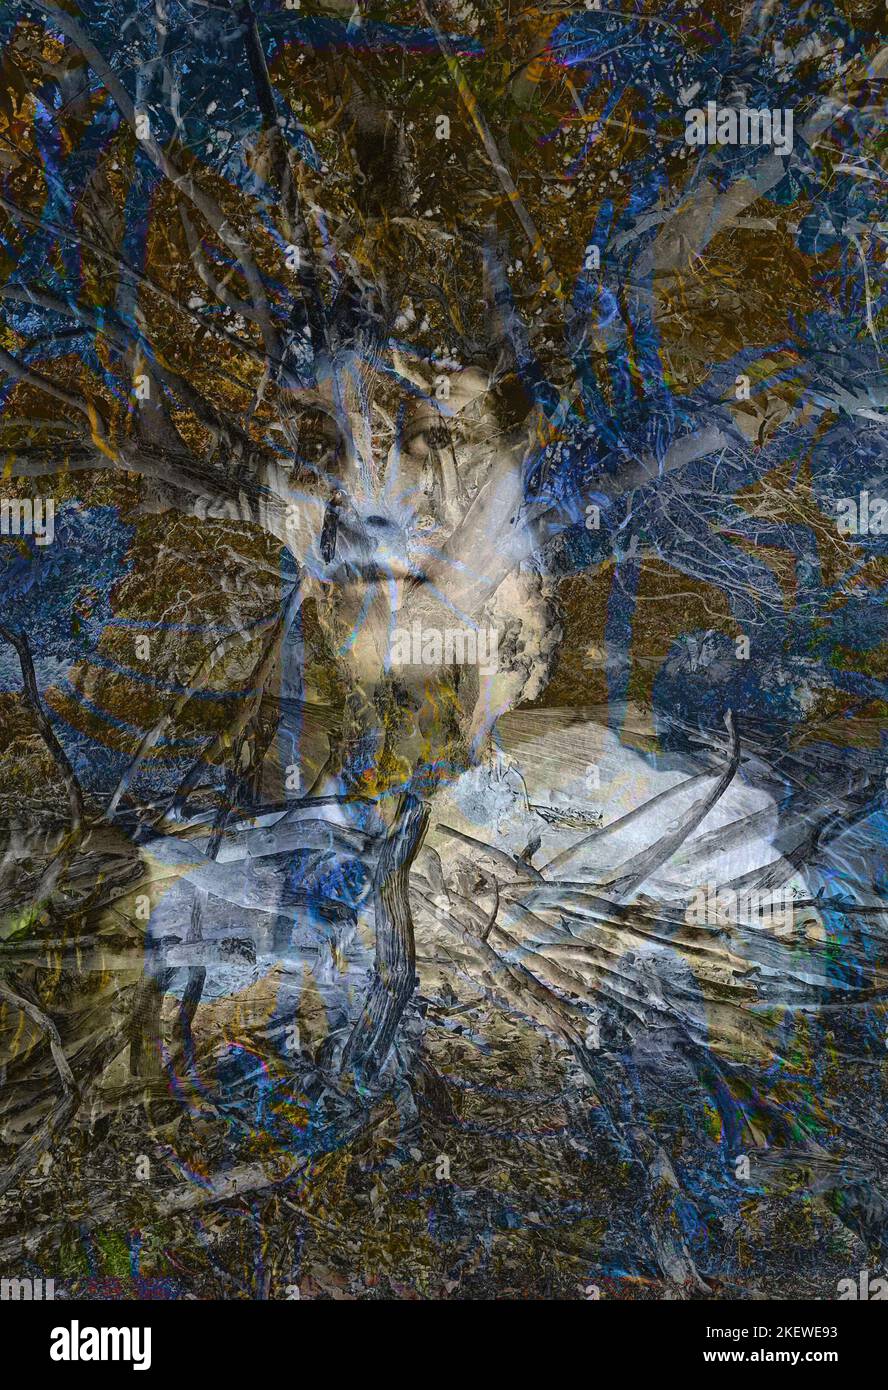 Creative digital montage of two images. Old photograph of an unknown young woman called Olive aged 16 and an old tree with roots Stock Photo